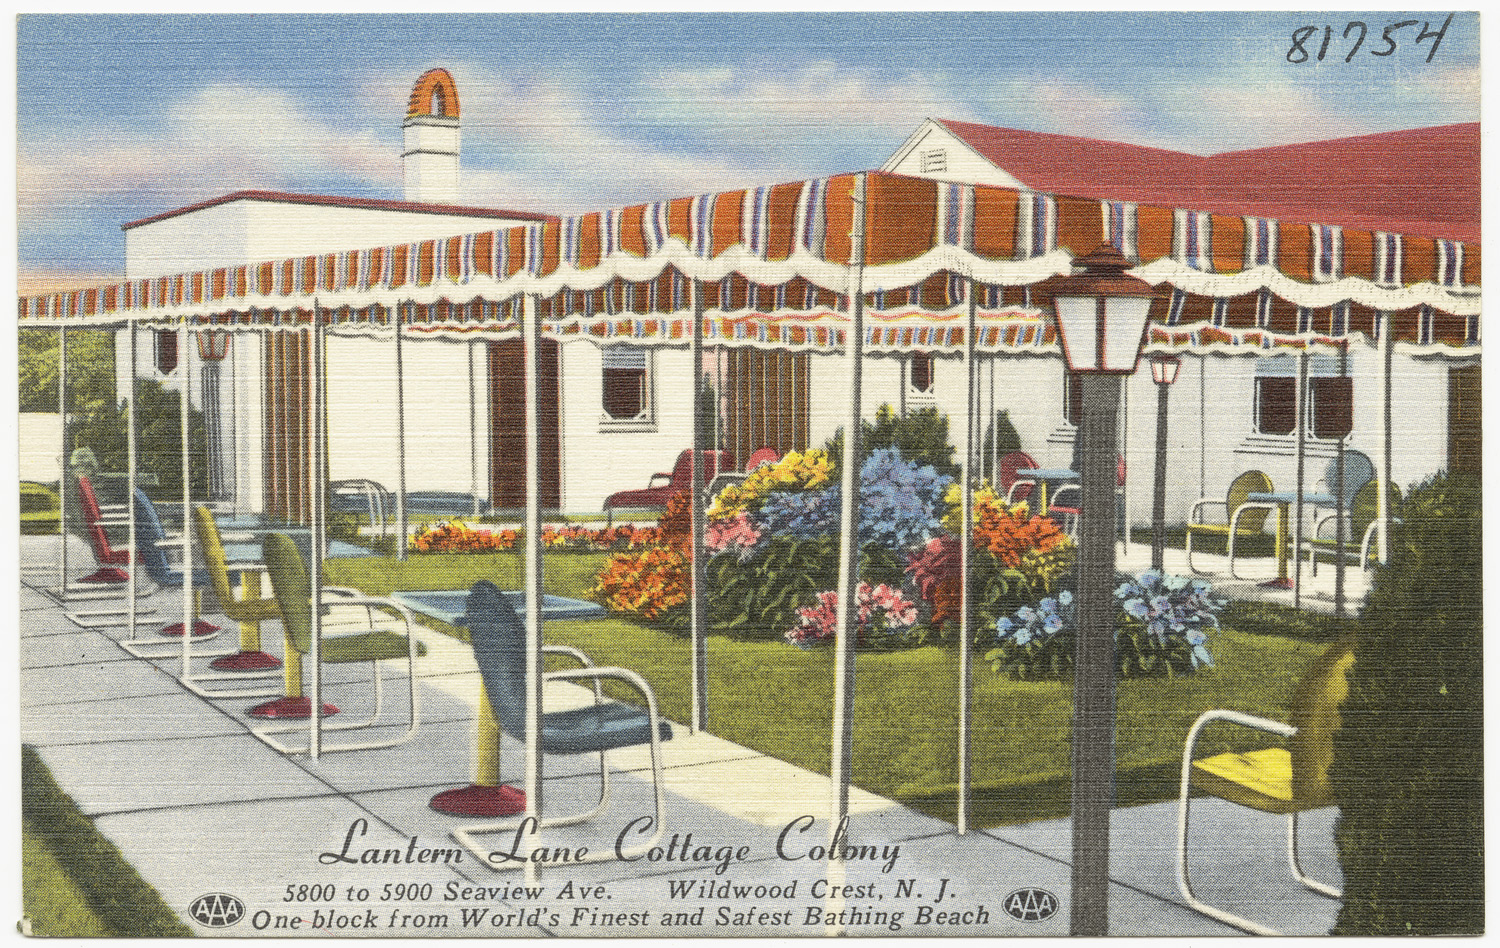 the garden cottage is shown in this vintage postcard